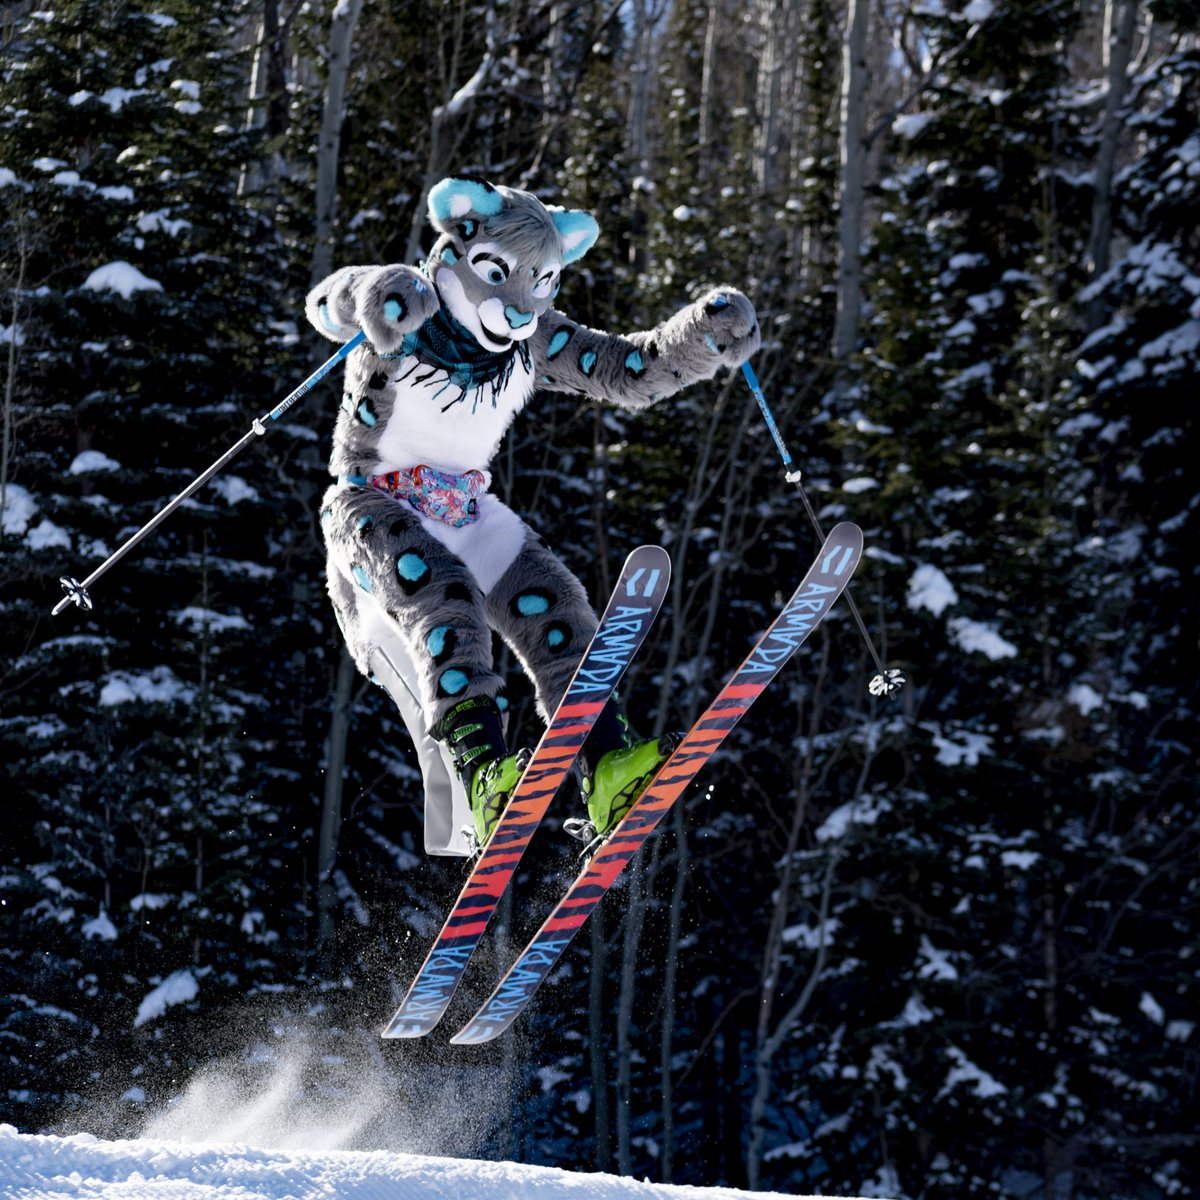 Another really good shot of @terahSnep launching himself off a jump at Steamboat. Not sure how I missed this one earlier